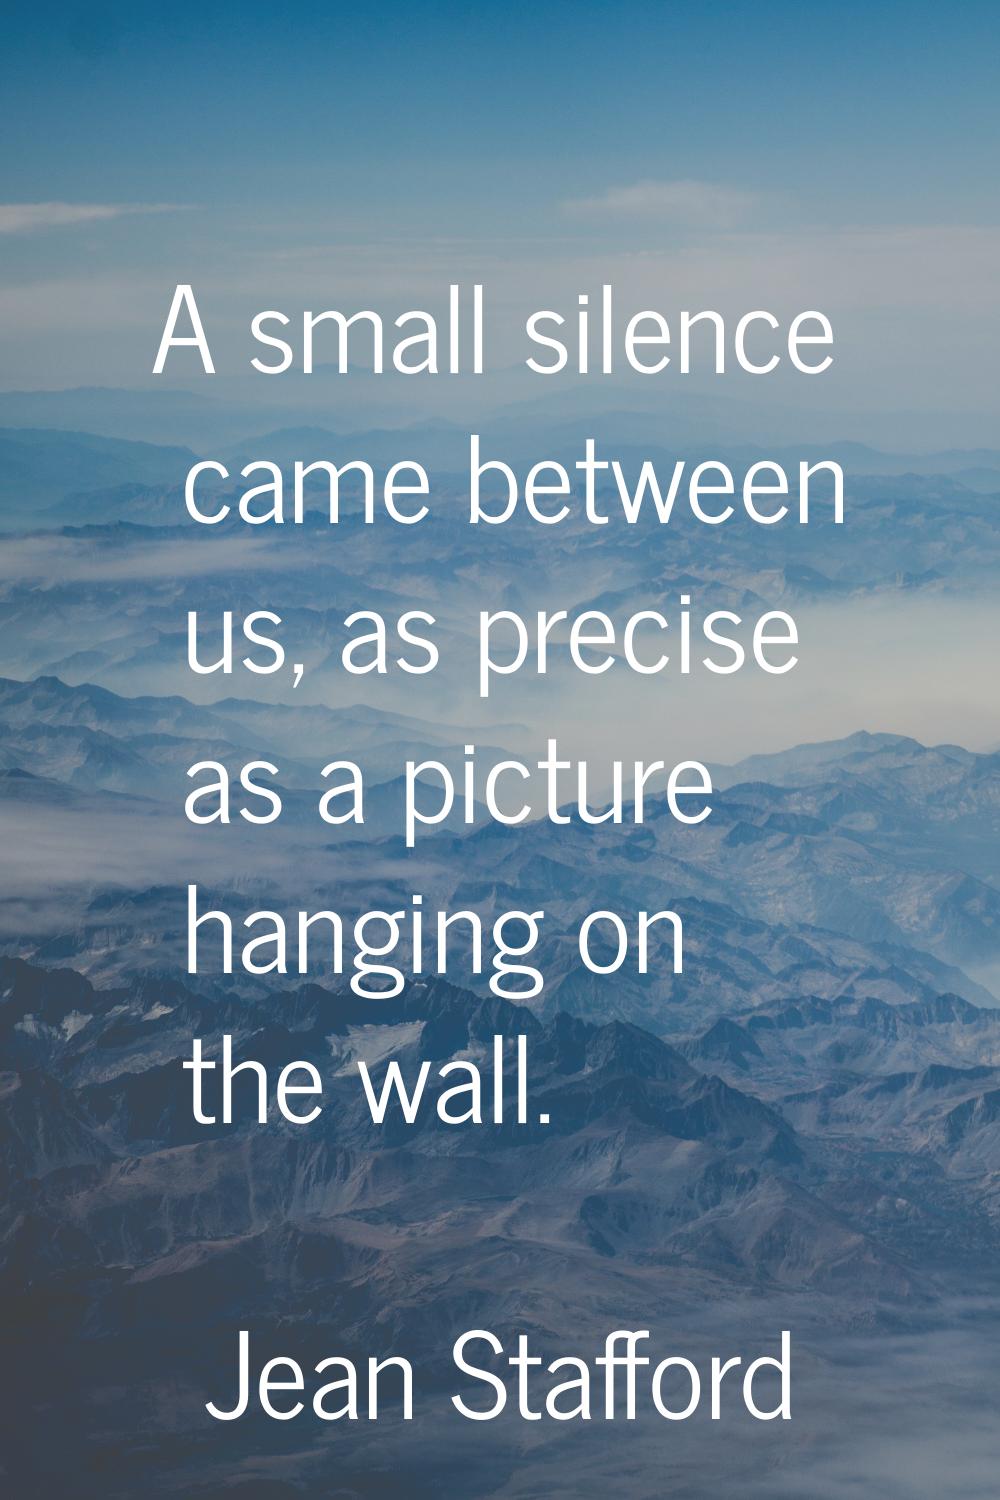 A small silence came between us, as precise as a picture hanging on the wall.